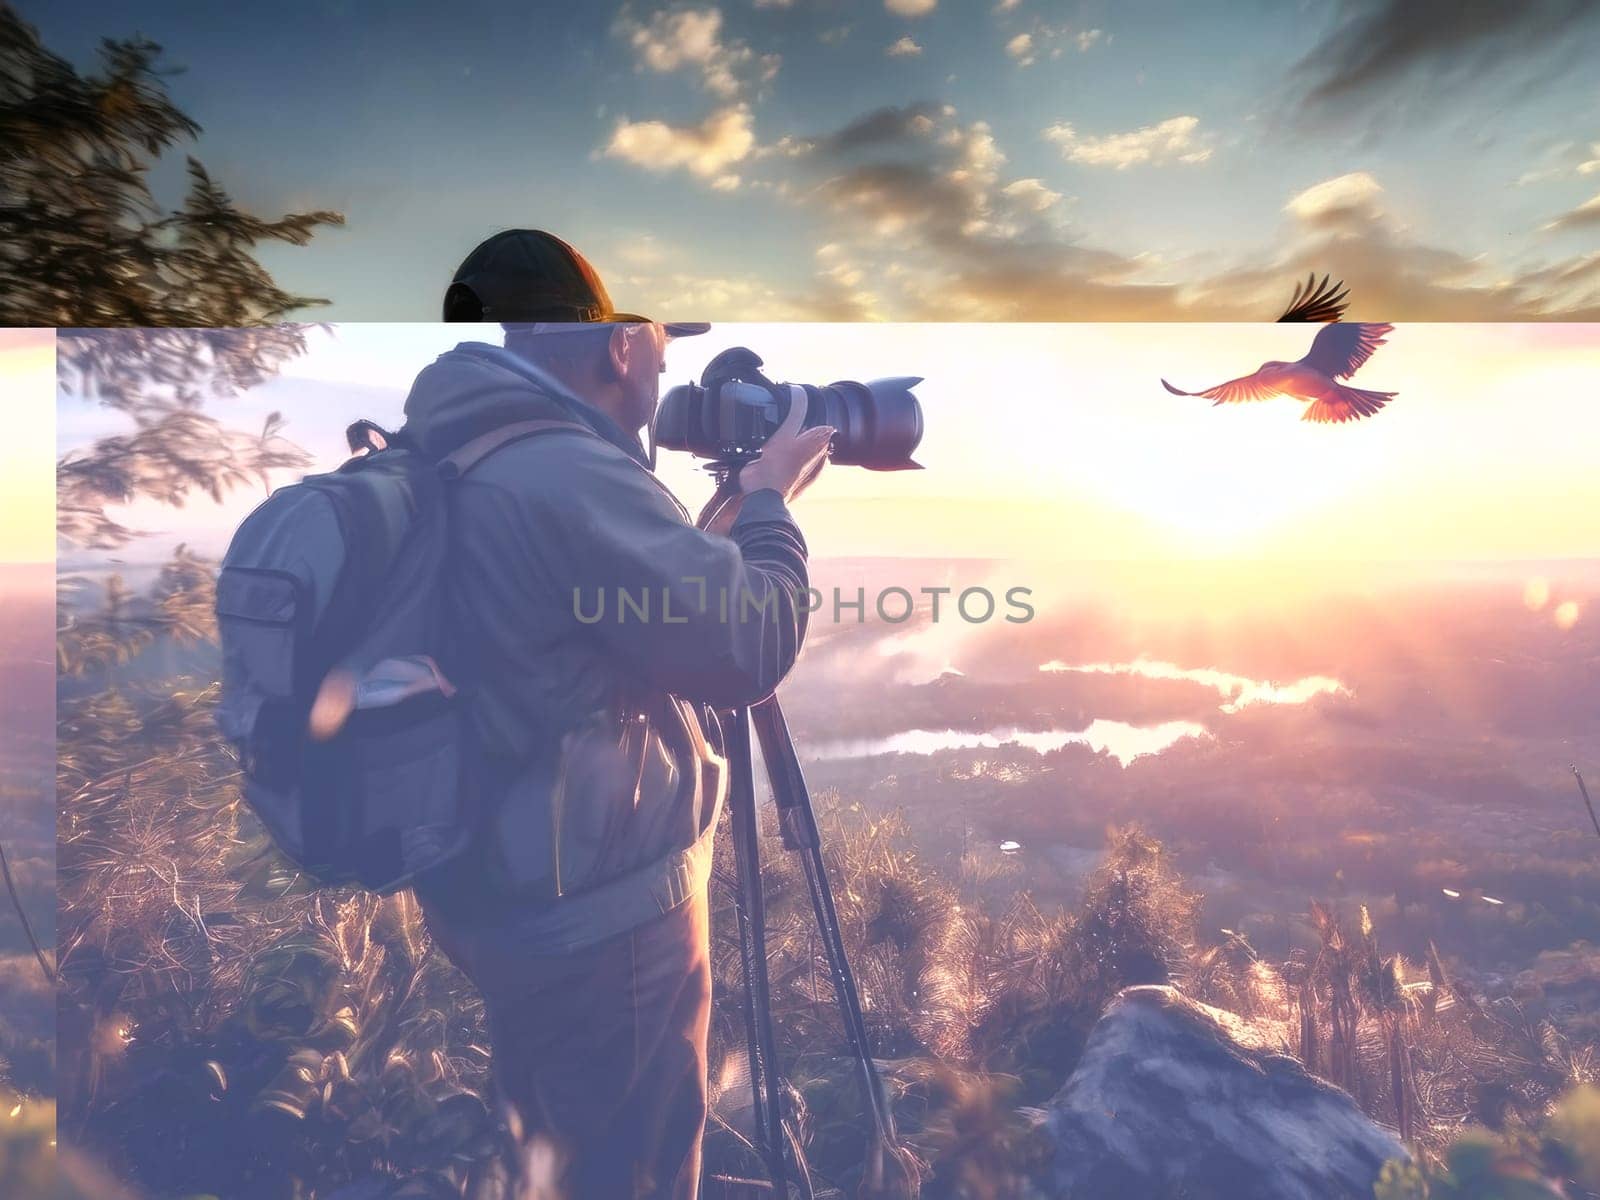 Birdwatcher on sunrise with tripod and camera take shot on birds. Amazing landscape and birdwatcher silhouette with camera. Wildlife photography concept